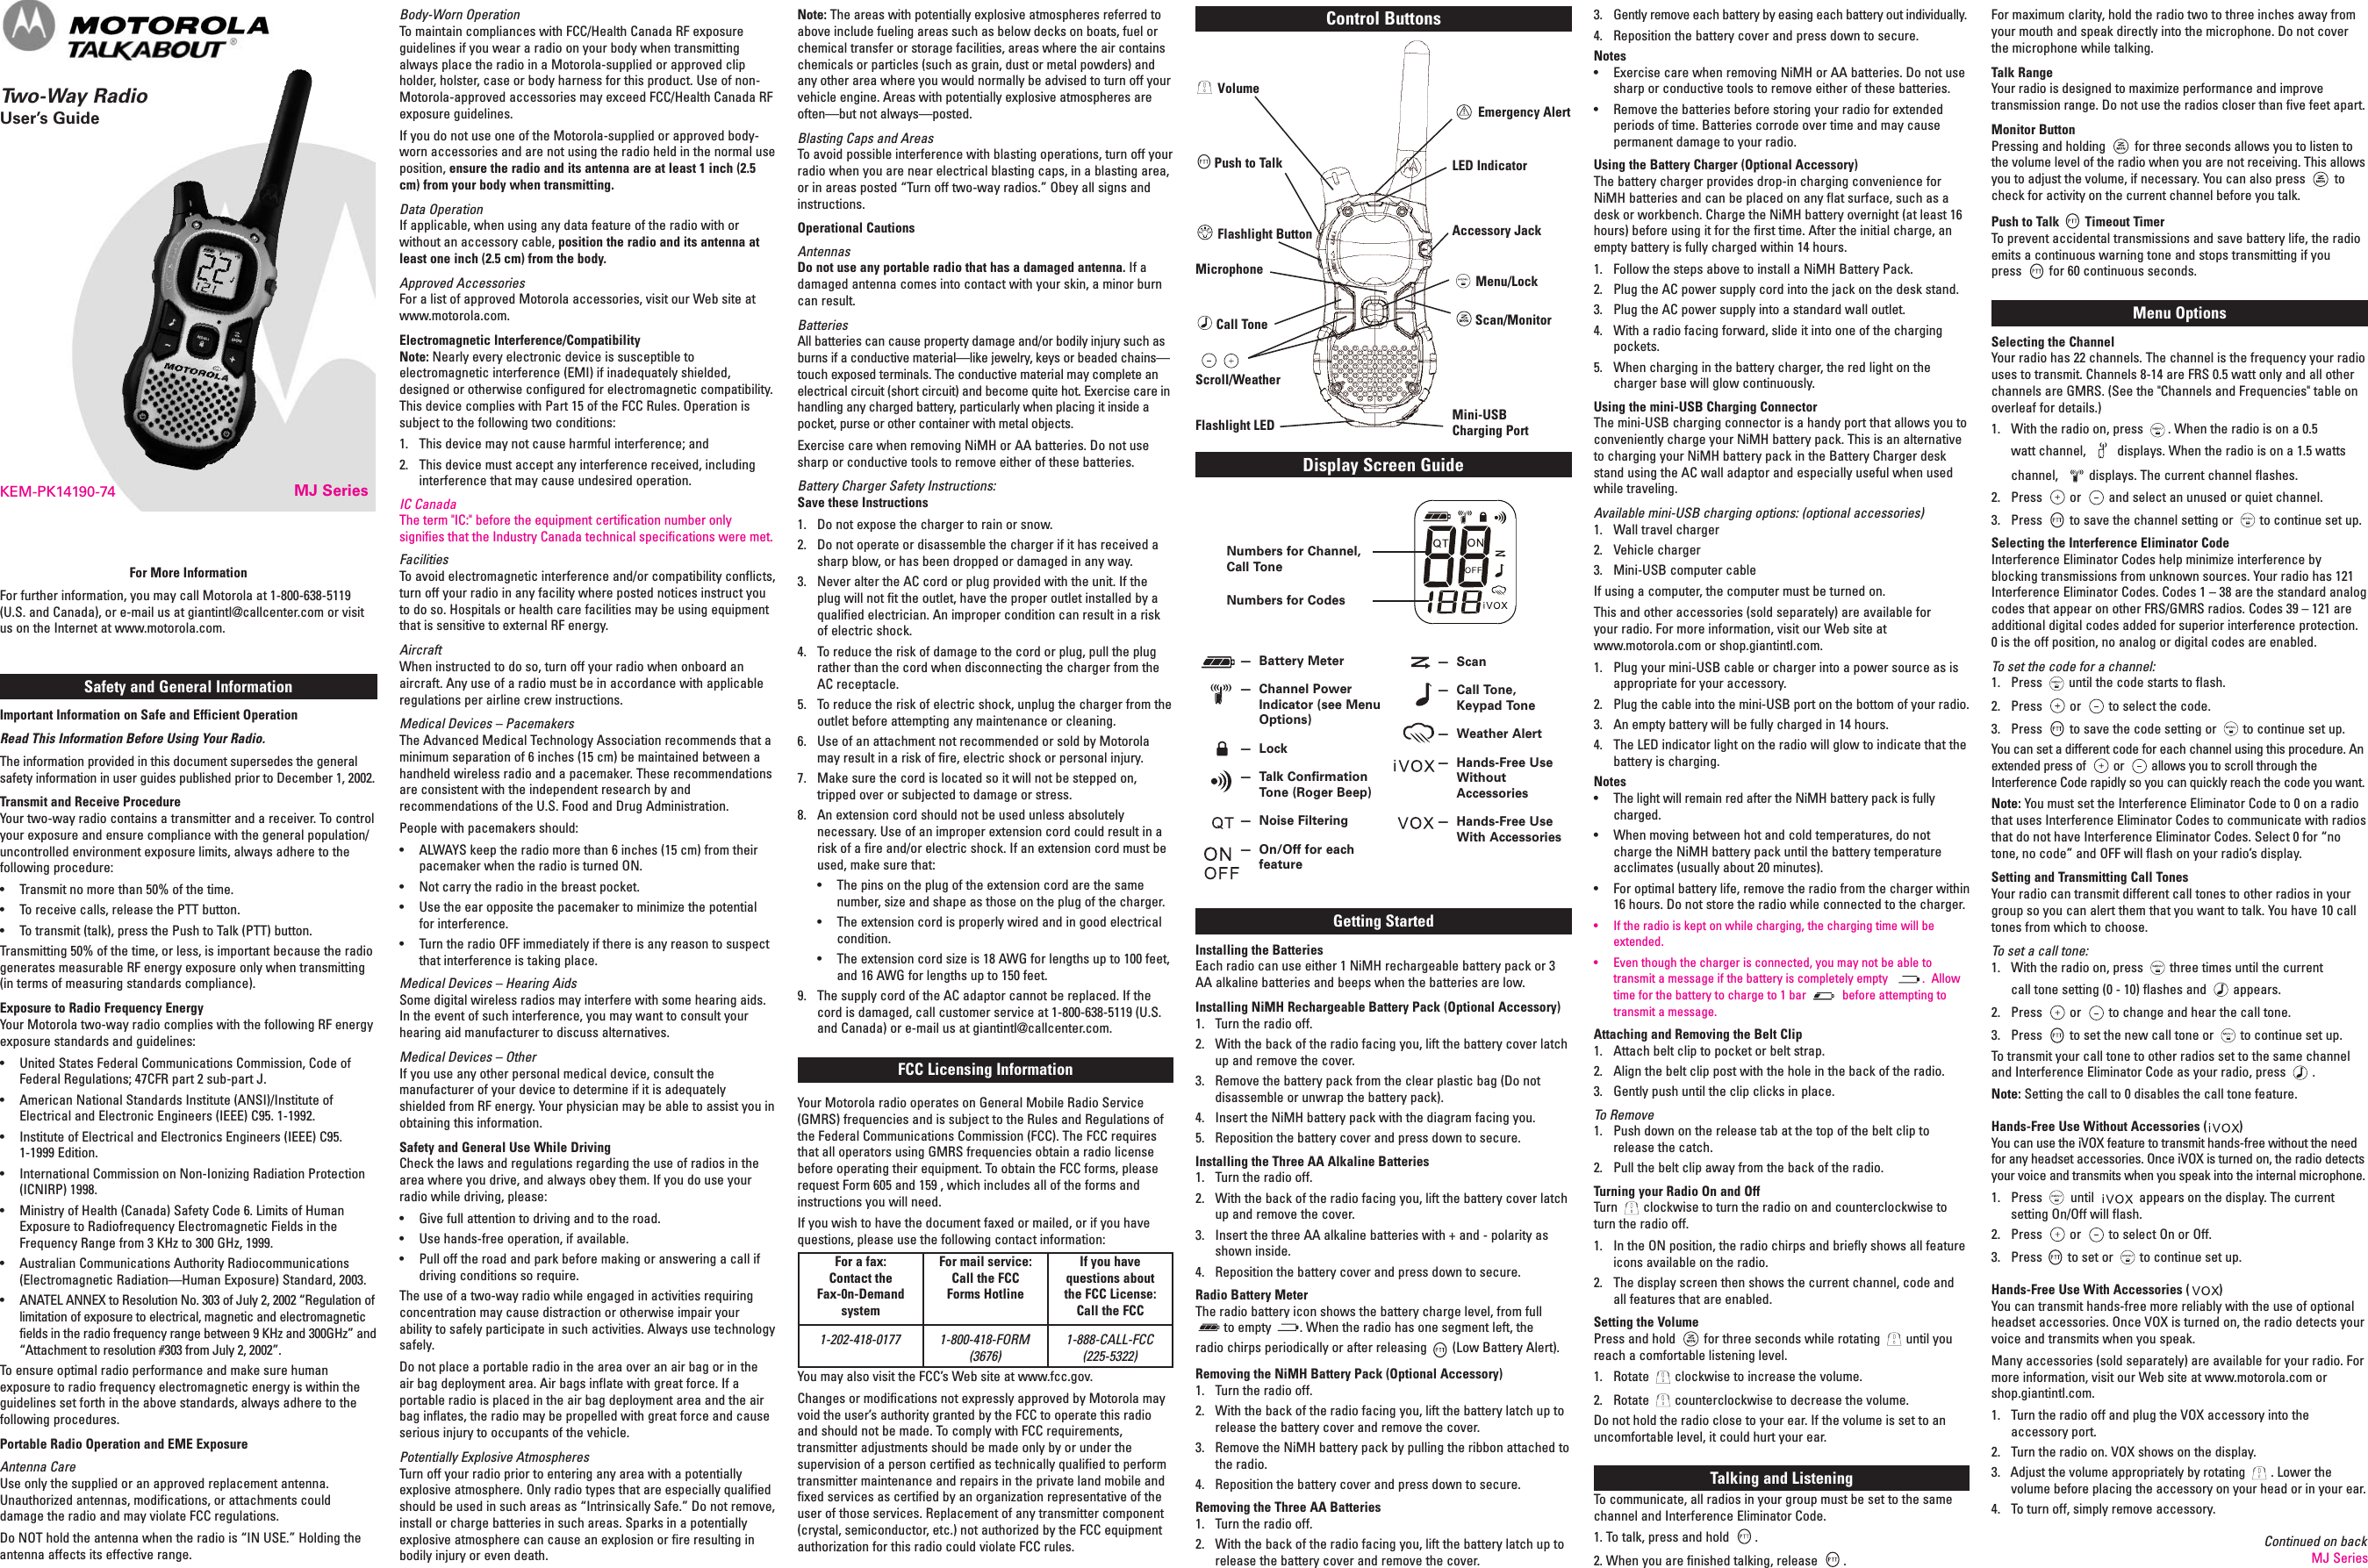 MJ SeriesKEM-PK14190-74Safety and General InformationImportant Information on Safe and Efficient OperationRead This Information Before Using Your Radio.The information provided in this document supersedes the generalsafety information in user guides published prior to December 1, 2002.Transmit and Receive ProcedureYour two-way radio contains a transmitter and a receiver. To controlyour exposure and ensure compliance with the general population/uncontrolled environment exposure limits, always adhere to thefollowing procedure:• Transmit no more than 50% of the time.• To receive calls, release the PTT button.• To transmit (talk), press the Push to Talk (PTT) button.Transmitting 50% of the time, or less, is important because the radiogenerates measurable RF energy exposure only when transmitting(in terms of measuring standards compliance).Exposure to Radio Frequency EnergyYour Motorola two-way radio complies with the following RF energyexposure standards and guidelines:• United States Federal Communications Commission, Code ofFederal Regulations; 47CFR part 2 sub-part J.• American National Standards Institute (ANSI)/Institute ofElectrical and Electronic Engineers (IEEE) C95. 1-1992.• Institute of Electrical and Electronics Engineers (IEEE) C95.1-1999 Edition.• International Commission on Non-Ionizing Radiation Protection(ICNIRP) 1998.• Ministry of Health (Canada) Safety Code 6. Limits of HumanExposure to Radiofrequency Electromagnetic Fields in theFrequency Range from 3 KHz to 300 GHz, 1999.• Australian Communications Authority Radiocommunications(Electromagnetic Radiation—Human Exposure) Standard, 2003.• ANATEL ANNEX to Resolution No. 303 of July 2, 2002 “Regulation oflimitation of exposure to electrical, magnetic and electromagneticfields in the radio frequency range between 9 KHz and 300GHz” and“Attachment to resolution #303 from July 2, 2002”.To ensure optimal radio performance and make sure humanexposure to radio frequency electromagnetic energy is within theguidelines set forth in the above standards, always adhere to thefollowing procedures.Portable Radio Operation and EME ExposureAntenna CareUse only the supplied or an approved replacement antenna.Unauthorized antennas, modifications, or attachments coulddamage the radio and may violate FCC regulations.Do NOT hold the antenna when the radio is “IN USE.” Holding theantenna affects its effective range.Body-Worn OperationTo maintain compliances with FCC/Health Canada RF exposureguidelines if you wear a radio on your body when transmittingalways place the radio in a Motorola-supplied or approved clipholder, holster, case or body harness for this product. Use of non-Motorola-approved accessories may exceed FCC/Health Canada RFexposure guidelines.If you do not use one of the Motorola-supplied or approved body-worn accessories and are not using the radio held in the normal useposition, ensure the radio and its antenna are at least 1 inch (2.5cm) from your body when transmitting.Data OperationIf applicable, when using any data feature of the radio with orwithout an accessory cable, position the radio and its antenna atleast one inch (2.5 cm) from the body.Approved AccessoriesFor a list of approved Motorola accessories, visit our Web site atwww.motorola.com.Electromagnetic Interference/CompatibilityNote: Nearly every electronic device is susceptible toelectromagnetic interference (EMI) if inadequately shielded,designed or otherwise configured for electromagnetic compatibility.This device complies with Part 15 of the FCC Rules. Operation issubject to the following two conditions:1. This device may not cause harmful interference; and2. This device must accept any interference received, includinginterference that may cause undesired operation.IC CanadaThe term &quot;IC:&quot; before the equipment certification number onlysignifies that the Industry Canada technical specifications were met.FacilitiesTo avoid electromagnetic interference and/or compatibility conflicts,turn off your radio in any facility where posted notices instruct youto do so. Hospitals or health care facilities may be using equipmentthat is sensitive to external RF energy.AircraftWhen instructed to do so, turn off your radio when onboard anaircraft. Any use of a radio must be in accordance with applicableregulations per airline crew instructions.Medical Devices – PacemakersThe Advanced Medical Technology Association recommends that aminimum separation of 6 inches (15 cm) be maintained between ahandheld wireless radio and a pacemaker. These recommendationsare consistent with the independent research by andrecommendations of the U.S. Food and Drug Administration.People with pacemakers should:• ALWAYS keep the radio more than 6 inches (15 cm) from theirpacemaker when the radio is turned ON.• Not carry the radio in the breast pocket.• Use the ear opposite the pacemaker to minimize the potentialfor interference.• Turn the radio OFF immediately if there is any reason to suspectthat interference is taking place.Medical Devices – Hearing AidsSome digital wireless radios may interfere with some hearing aids.In the event of such interference, you may want to consult yourhearing aid manufacturer to discuss alternatives.Medical Devices – OtherIf you use any other personal medical device, consult themanufacturer of your device to determine if it is adequatelyshielded from RF energy. Your physician may be able to assist you inobtaining this information.Safety and General Use While DrivingCheck the laws and regulations regarding the use of radios in thearea where you drive, and always obey them. If you do use yourradio while driving, please:• Give full attention to driving and to the road.• Use hands-free operation, if available.• Pull off the road and park before making or answering a call ifdriving conditions so require.The use of a two-way radio while engaged in activities requiringconcentration may cause distraction or otherwise impair yourability to safely participate in such activities. Always use technologysafely.Do not place a portable radio in the area over an air bag or in theair bag deployment area. Air bags inflate with great force. If aportable radio is placed in the air bag deployment area and the airbag inflates, the radio may be propelled with great force and causeserious injury to occupants of the vehicle.Potentially Explosive AtmospheresTurn off your radio prior to entering any area with a potentiallyexplosive atmosphere. Only radio types that are especially qualifiedshould be used in such areas as “Intrinsically Safe.” Do not remove,install or charge batteries in such areas. Sparks in a potentiallyexplosive atmosphere can cause an explosion or fire resulting inbodily injury or even death.For More InformationFor further information, you may call Motorola at 1-800-638-5119(U.S. and Canada), or e-mail us at giantintl@callcenter.com or visitus on the Internet at www.motorola.com.Note: The areas with potentially explosive atmospheres referred toabove include fueling areas such as below decks on boats, fuel orchemical transfer or storage facilities, areas where the air containschemicals or particles (such as grain, dust or metal powders) andany other area where you would normally be advised to turn off yourvehicle engine. Areas with potentially explosive atmospheres areoften—but not always—posted.Blasting Caps and AreasTo avoid possible interference with blasting operations, turn off yourradio when you are near electrical blasting caps, in a blasting area,or in areas posted “Turn off two-way radios.” Obey all signs andinstructions.Operational CautionsAntennasDo not use any portable radio that has a damaged antenna. If adamaged antenna comes into contact with your skin, a minor burncan result.BatteriesAll batteries can cause property damage and/or bodily injury such asburns if a conductive material—like jewelry, keys or beaded chains—touch exposed terminals. The conductive material may complete anelectrical circuit (short circuit) and become quite hot. Exercise care inhandling any charged battery, particularly when placing it inside apocket, purse or other container with metal objects.Exercise care when removing NiMH or AA batteries. Do not usesharp or conductive tools to remove either of these batteries.Battery Charger Safety Instructions:Save these Instructions1. Do not expose the charger to rain or snow.2. Do not operate or disassemble the charger if it has received asharp blow, or has been dropped or damaged in any way.3. Never alter the AC cord or plug provided with the unit. If theplug will not fit the outlet, have the proper outlet installed by aqualified electrician. An improper condition can result in a riskof electric shock.4. To reduce the risk of damage to the cord or plug, pull the plugrather than the cord when disconnecting the charger from theAC receptacle.5. To reduce the risk of electric shock, unplug the charger from theoutlet before attempting any maintenance or cleaning.6. Use of an attachment not recommended or sold by Motorolamay result in a risk of fire, electric shock or personal injury.7. Make sure the cord is located so it will not be stepped on,tripped over or subjected to damage or stress.8. An extension cord should not be used unless absolutelynecessary. Use of an improper extension cord could result in arisk of a fire and/or electric shock. If an extension cord must beused, make sure that:• The pins on the plug of the extension cord are the samenumber, size and shape as those on the plug of the charger.• The extension cord is properly wired and in good electricalcondition.• The extension cord size is 18 AWG for lengths up to 100 feet,and 16 AWG for lengths up to 150 feet.9. The supply cord of the AC adaptor cannot be replaced. If thecord is damaged, call customer service at 1-800-638-5119 (U.S.and Canada) or e-mail us at giantintl@callcenter.com.FCC Licensing InformationYour Motorola radio operates on General Mobile Radio Service(GMRS) frequencies and is subject to the Rules and Regulations ofthe Federal Communications Commission (FCC). The FCC requiresthat all operators using GMRS frequencies obtain a radio licensebefore operating their equipment. To obtain the FCC forms, pleaserequest Form 605 and 159 , which includes all of the forms andinstructions you will need.If you wish to have the document faxed or mailed, or if you havequestions, please use the following contact information:You may also visit the FCC’s Web site at www.fcc.gov.Changes or modifications not expressly approved by Motorola mayvoid the user’s authority granted by the FCC to operate this radioand should not be made. To comply with FCC requirements,transmitter adjustments should be made only by or under thesupervision of a person certified as technically qualified to performtransmitter maintenance and repairs in the private land mobile andfixed services as certified by an organization representative of theuser of those services. Replacement of any transmitter component(crystal, semiconductor, etc.) not authorized by the FCC equipmentauthorization for this radio could violate FCC rules.®For maximum clarity, hold the radio two to three inches away fromyour mouth and speak directly into the microphone. Do not coverthe microphone while talking.Talk RangeYour radio is designed to maximize performance and improvetransmission range. Do not use the radios closer than five feet apart.Monitor ButtonPressing and holding for three seconds allows you to listen tothe volume level of the radio when you are not receiving. This allowsyou to adjust the volume, if necessary. You can also press tocheck for activity on the current channel before you talk.Push to Talk Timeout TimerTo prevent accidental transmissions and save battery life, the radioemits a continuous warning tone and stops transmitting if youpress for 60 continuous seconds.Menu OptionsSelecting the ChannelYour radio has 22 channels. The channel is the frequency your radiouses to transmit. Channels 8-14 are FRS 0.5 watt only and all otherchannels are GMRS. (See the &quot;Channels and Frequencies&quot; table onoverleaf for details.)1. With the radio on, press . When the radio is on a 0.5watt channel, displays. When the radio is on a 1.5 wattschannel, displays. The current channel flashes.2. Press or and select an unused or quiet channel.3. Press to save the channel setting or to continue set up.Selecting the Interference Eliminator CodeInterference Eliminator Codes help minimize interference byblocking transmissions from unknown sources. Your radio has 121Interference Eliminator Codes. Codes 1 – 38 are the standard analogcodes that appear on other FRS/GMRS radios. Codes 39 – 121 areadditional digital codes added for superior interference protection.0 is the off position, no analog or digital codes are enabled.To set the code for a channel:1. Press until the code starts to flash.2. Press or to select the code.3. Press to save the code setting or to continue set up.You can set a different code for each channel using this procedure. Anextended press of or allows you to scroll through theInterference Code rapidly so you can quickly reach the code you want.Note: You must set the Interference Eliminator Code to 0 on a radiothat uses Interference Eliminator Codes to communicate with radiosthat do not have Interference Eliminator Codes. Select 0 for “notone, no code” and OFF will flash on your radio’s display.Setting and Transmitting Call TonesYour radio can transmit different call tones to other radios in yourgroup so you can alert them that you want to talk. You have 10 calltones from which to choose.To set a call tone:1. With the radio on, press three times until the currentcall tone setting (0 - 10) flashes and appears.2. Press or to change and hear the call tone.3. Press to set the new call tone or to continue set up.To transmit your call tone to other radios set to the same channeland Interference Eliminator Code as your radio, press .Note: Setting the call to 0 disables the call tone feature.Hands-Free Use Without Accessories ( )You can use the iVOX feature to transmit hands-free without the needfor any headset accessories. Once iVOX is turned on, the radio detectsyour voice and transmits when you speak into the internal microphone.1. Press until appears on the display. The currentsetting On/Off will flash.2. Press or to select On or Off.3. Press to set or to continue set up.Hands-Free Use With Accessories ( )You can transmit hands-free more reliably with the use of optionalheadset accessories. Once VOX is turned on, the radio detects yourvoice and transmits when you speak.Many accessories (sold separately) are available for your radio. Formore information, visit our Web site at www.motorola.com orshop.giantintl.com.1. Turn the radio off and plug the VOX accessory into theaccessory port.2. Turn the radio on. VOX shows on the display.3. Adjust the volume appropriately by rotating . Lower thevolume before placing the accessory on your head or in your ear.4. To turn off, simply remove accessory.Display Screen GuideNumbers for Channel,Call ToneNumbers for Codes— Battery Meter— Channel PowerIndicator (see MenuOptions)— Lock— Talk ConfirmationTone (Roger Beep)— Noise Filtering— On/Off for eachfeature— Scan— Call Tone,Keypad Tone— Weather Alert— Hands-Free UseWithoutAccessories— Hands-Free UseWith AccessoriesContinued on backMJ SeriesControl ButtonsVolumePush to TalkFlashlight ButtonMicrophoneCall ToneScroll/WeatherFlashlight LEDEmergency AlertLED IndicatorAccessory JackMenu/LockScan/MonitorMini-USBCharging PortGetting StartedInstalling the BatteriesEach radio can use either 1 NiMH rechargeable battery pack or 3AA alkaline batteries and beeps when the batteries are low.Installing NiMH Rechargeable Battery Pack (Optional Accessory)1. Turn the radio off.2. With the back of the radio facing you, lift the battery cover latchup and remove the cover.3. Remove the battery pack from the clear plastic bag (Do notdisassemble or unwrap the battery pack).4. Insert the NiMH battery pack with the diagram facing you.5. Reposition the battery cover and press down to secure.Installing the Three AA Alkaline Batteries1. Turn the radio off.2. With the back of the radio facing you, lift the battery cover latchup and remove the cover.3. Insert the three AA alkaline batteries with + and - polarity asshown inside.4. Reposition the battery cover and press down to secure.Radio Battery MeterThe radio battery icon shows the battery charge level, from fullto empty . When the radio has one segment left, theradio chirps periodically or after releasing (Low Battery Alert).Removing the NiMH Battery Pack (Optional Accessory)1. Turn the radio off.2. With the back of the radio facing you, lift the battery latch up torelease the battery cover and remove the cover.3. Remove the NiMH battery pack by pulling the ribbon attached tothe radio.4. Reposition the battery cover and press down to secure.Removing the Three AA Batteries1. Turn the radio off.2. With the back of the radio facing you, lift the battery latch up torelease the battery cover and remove the cover.For a fax:Contact theFax-0n-DemandsystemFor mail service:Call the FCCForms HotlineIf you havequestions aboutthe FCC License:Call the FCC1-202-418-0177 1-800-418-FORM(3676)1-888-CALL-FCC(225-5322)Two-Way RadioUser’s Guide3. Gently remove each battery by easing each battery out individually.4. Reposition the battery cover and press down to secure.Notes• Exercise care when removing NiMH or AA batteries. Do not usesharp or conductive tools to remove either of these batteries.• Remove the batteries before storing your radio for extendedperiods of time. Batteries corrode over time and may causepermanent damage to your radio.Using the Battery Charger (Optional Accessory)The battery charger provides drop-in charging convenience forNiMH batteries and can be placed on any flat surface, such as adesk or workbench. Charge the NiMH battery overnight (at least 16hours) before using it for the first time. After the initial charge, anempty battery is fully charged within 14 hours.1. Follow the steps above to install a NiMH Battery Pack.2. Plug the AC power supply cord into the jack on the desk stand.3. Plug the AC power supply into a standard wall outlet.4. With a radio facing forward, slide it into one of the chargingpockets.5. When charging in the battery charger, the red light on thecharger base will glow continuously.Using the mini-USB Charging ConnectorThe mini-USB charging connector is a handy port that allows you toconveniently charge your NiMH battery pack. This is an alternativeto charging your NiMH battery pack in the Battery Charger deskstand using the AC wall adaptor and especially useful when usedwhile traveling.Available mini-USB charging options: (optional accessories)1. Wall travel charger2. Vehicle charger3. Mini-USB computer cableIf using a computer, the computer must be turned on.This and other accessories (sold separately) are available foryour radio. For more information, visit our Web site atwww.motorola.com or shop.giantintl.com.1. Plug your mini-USB cable or charger into a power source as isappropriate for your accessory.2. Plug the cable into the mini-USB port on the bottom of your radio.3. An empty battery will be fully charged in 14 hours.4. The LED indicator light on the radio will glow to indicate that thebattery is charging.Notes• The light will remain red after the NiMH battery pack is fullycharged.• When moving between hot and cold temperatures, do notcharge the NiMH battery pack until the battery temperatureacclimates (usually about 20 minutes).• For optimal battery life, remove the radio from the charger within16 hours. Do not store the radio while connected to the charger.• If the radio is kept on while charging, the charging time will beextended.• Even though the charger is connected, you may not be able totransmit a message if the battery is completely empty . Allowtime for the battery to charge to 1 bar before attempting totransmit a message.Attaching and Removing the Belt Clip1. Attach belt clip to pocket or belt strap.2. Align the belt clip post with the hole in the back of the radio.3. Gently push until the clip clicks in place.To Remove1. Push down on the release tab at the top of the belt clip torelease the catch.2. Pull the belt clip away from the back of the radio.Turning your Radio On and OffTurn clockwise to turn the radio on and counterclockwise toturn the radio off.1. In the ON position, the radio chirps and briefly shows all featureicons available on the radio.2. The display screen then shows the current channel, code andall features that are enabled.Setting the VolumePress and hold for three seconds while rotating until youreach a comfortable listening level.1. Rotate clockwise to increase the volume.2. Rotate counterclockwise to decrease the volume.Do not hold the radio close to your ear. If the volume is set to anuncomfortable level, it could hurt your ear.Talking and ListeningTo communicate, all radios in your group must be set to the samechannel and Interference Eliminator Code.1. To talk, press and hold .2. When you are finished talking, release .